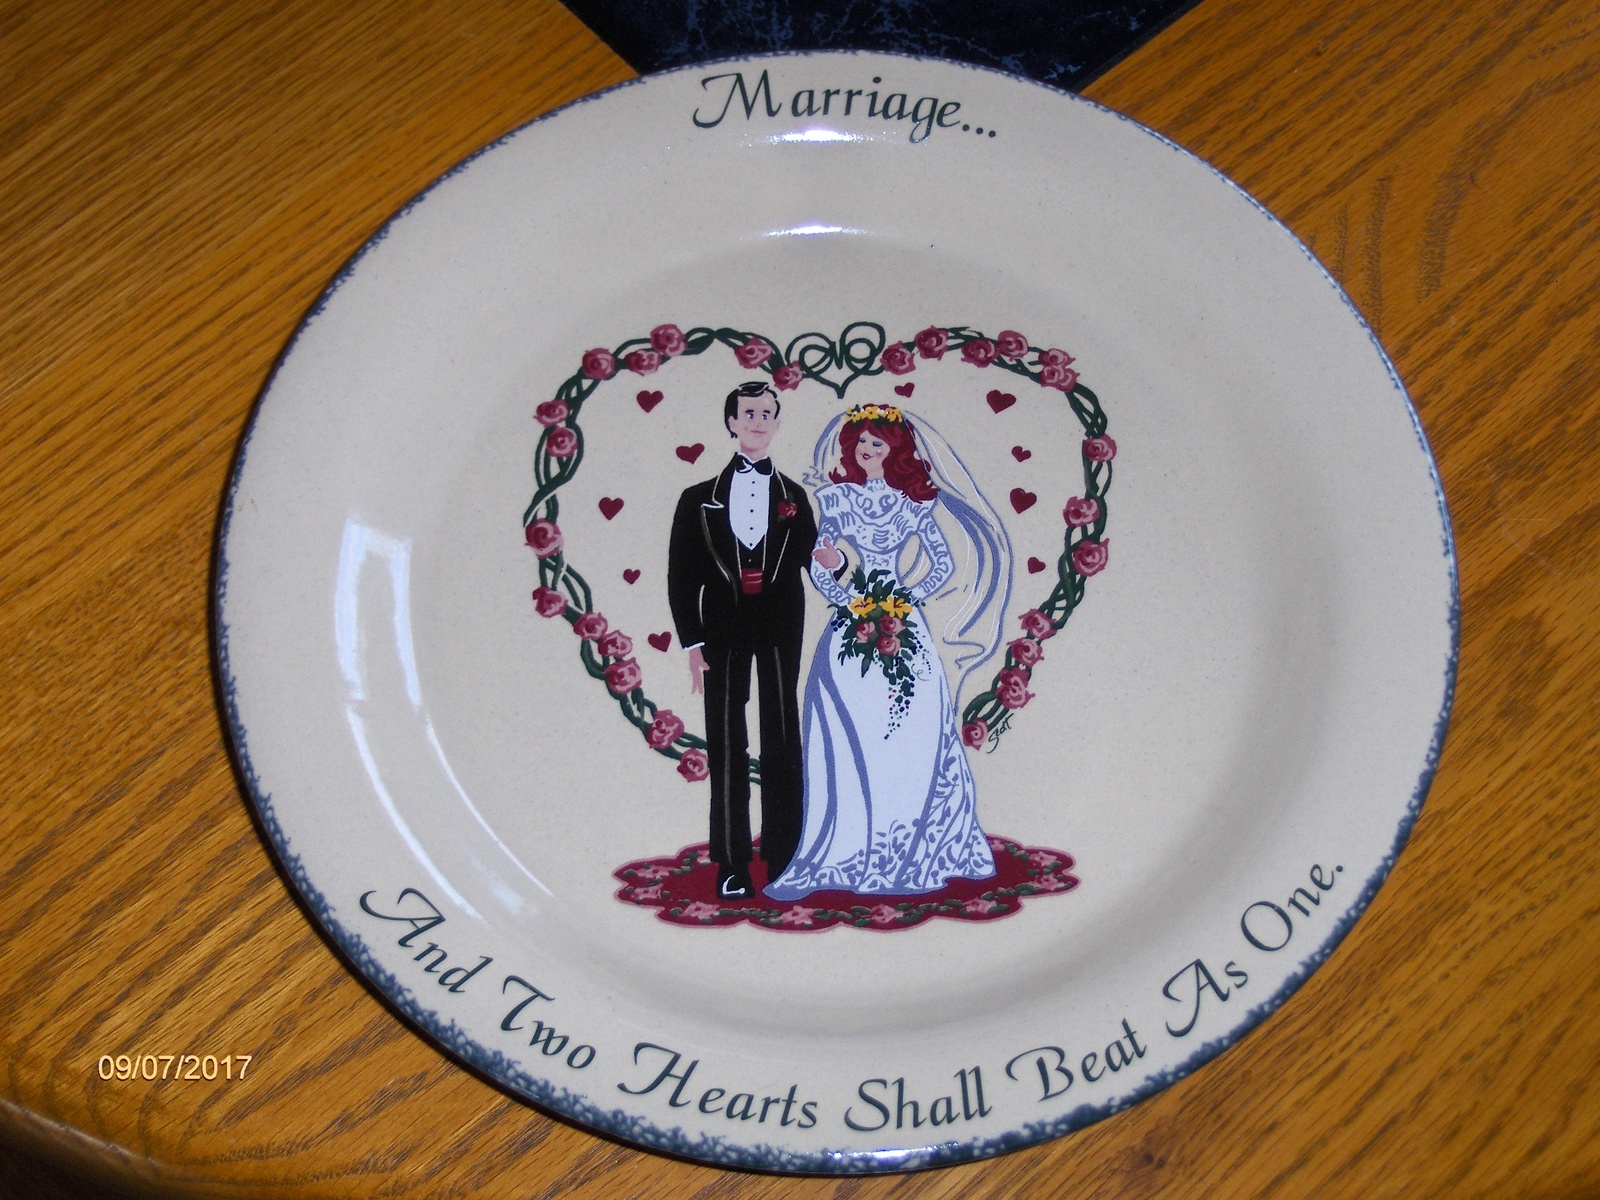 Primary image for Home & Garden Party 2000 Marriage And Two Hearts Shall Beat As One Pie Dish